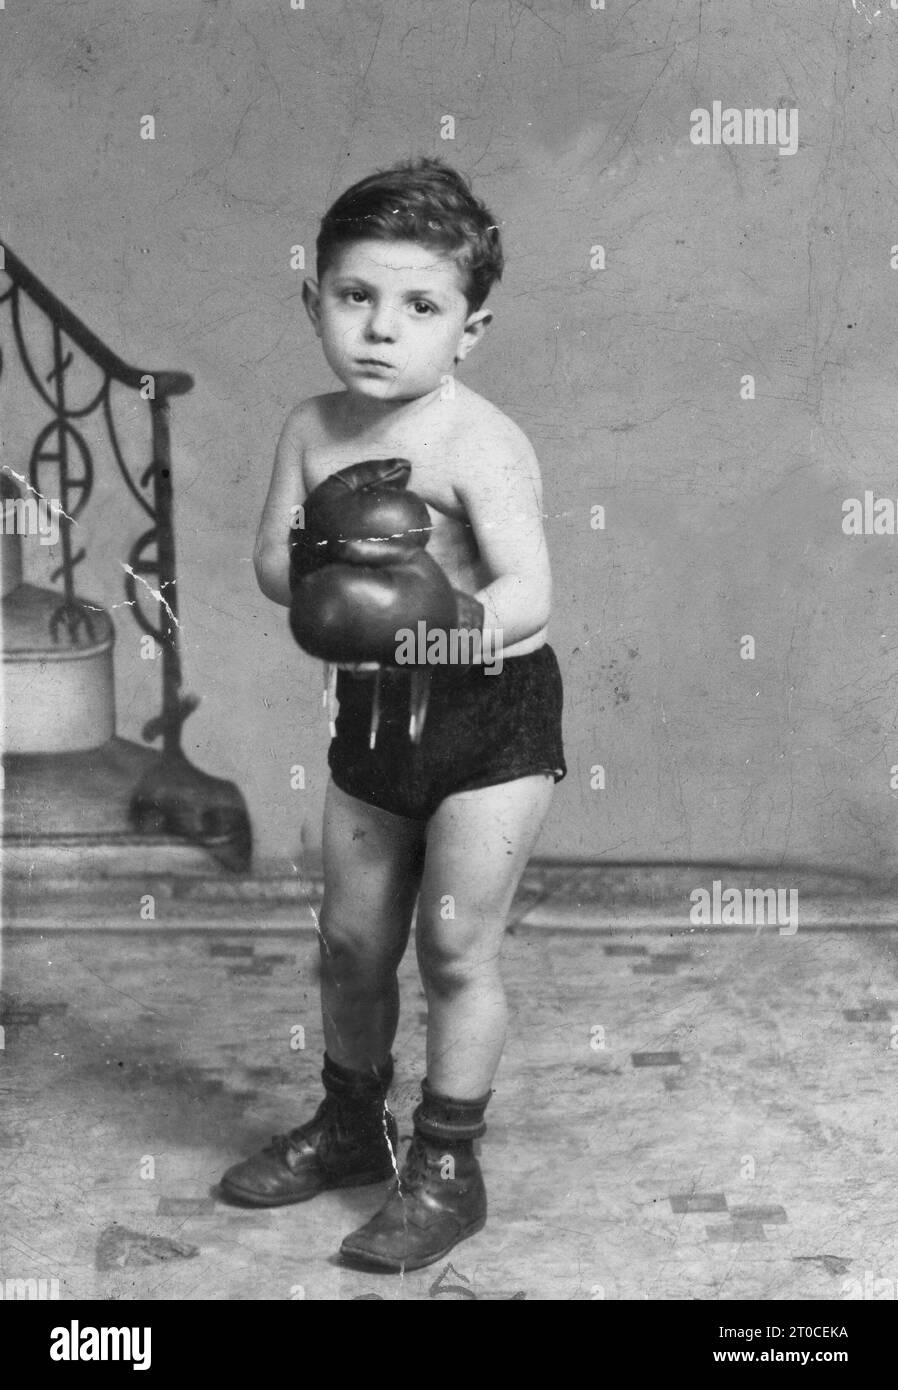 Circa 1944, Philadelphia, Pennsylvania: FRANKIE AVALON, 3, boxing gloves and ready. Francis Thomas Avallone, better known as Frankie Avalon, an American actor, singer, and former teen idol. He had 31 charting U.S. Billboard singles from 1958 to late 1962, including number one hits, 'Venus' and 'Why' in 1959. Born: September 18, 1940 , Philadelphia, PA. Height: 5? 8?. (Credit Image: © SMP/Globe Photos via ZUMA Press Wire) EDITORIAL USAGE ONLY! Not for Commercial USAGE! Stock Photo